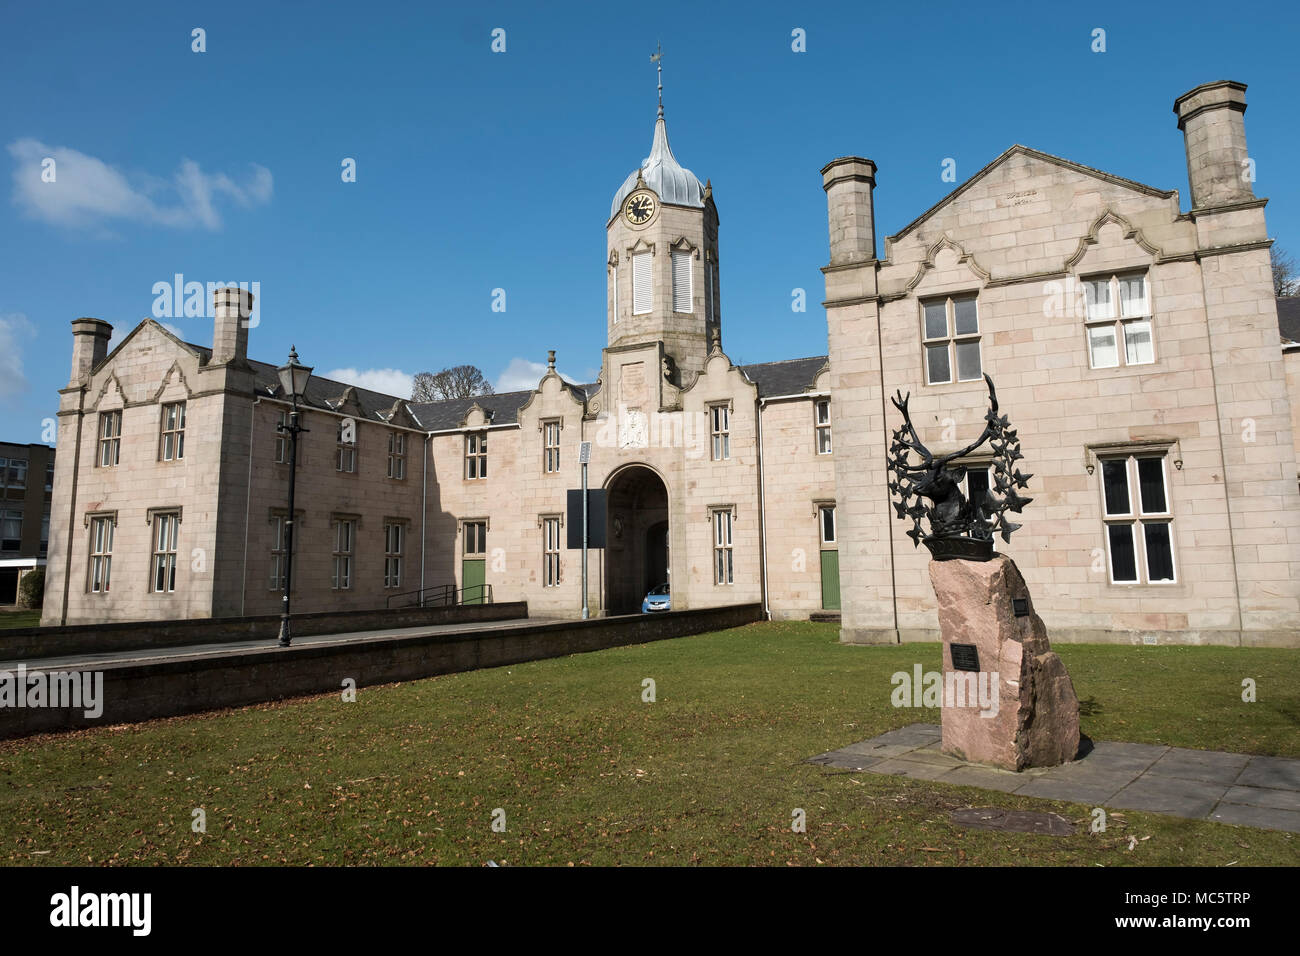 Simpson Building at Huntly in Aberdeenshire, Scotland. Stock Photo